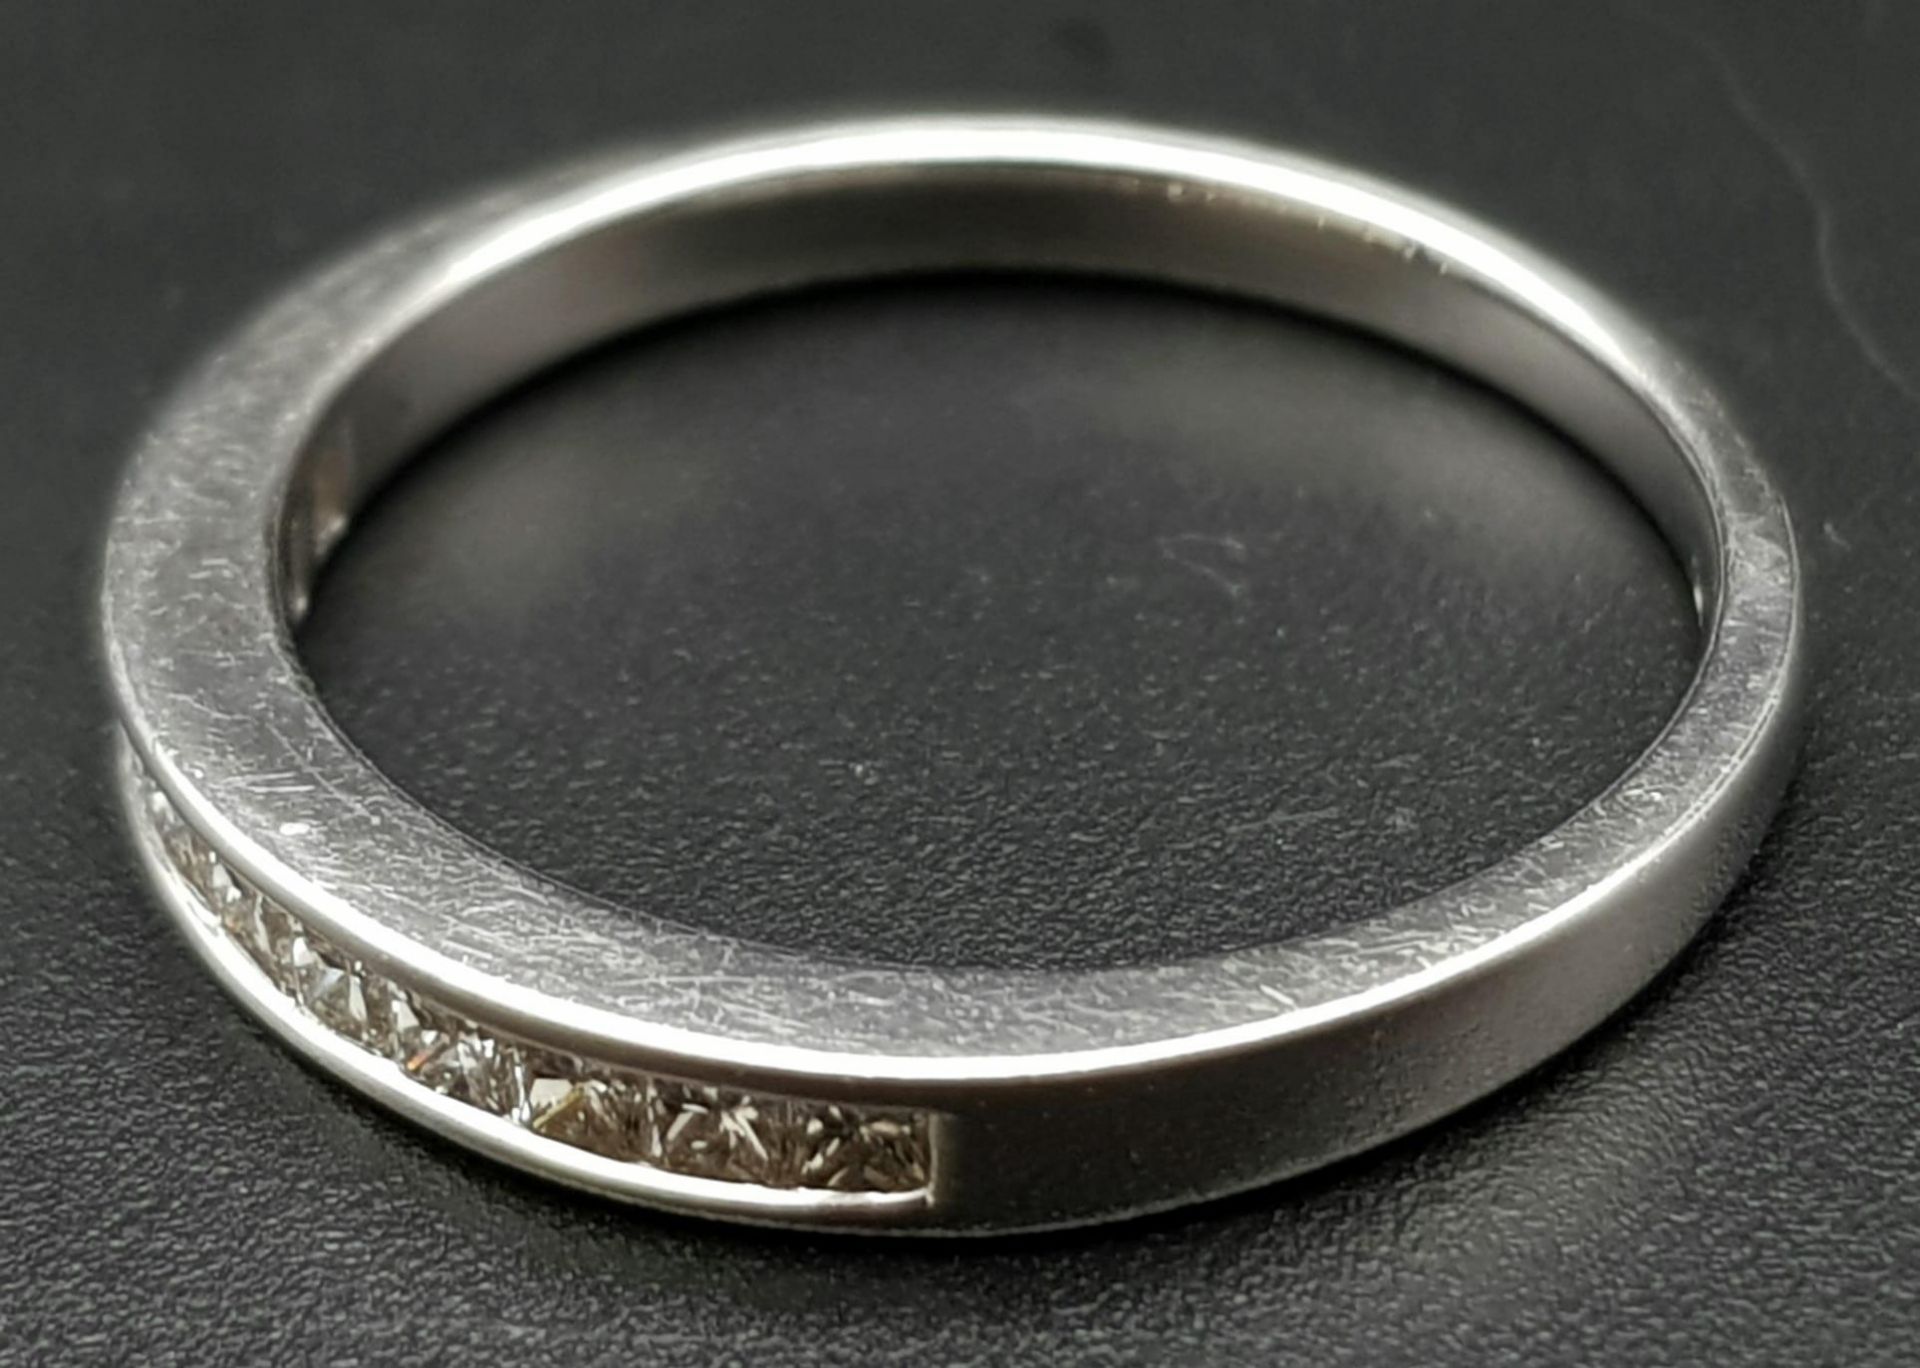 AN 18K WHITE GOLD DIAMOND 1/2 ETERNITY RING. CHANNEL SET PRINCESS CUTS. 0.35CTW. 2.5G. SIZE M - Image 3 of 5